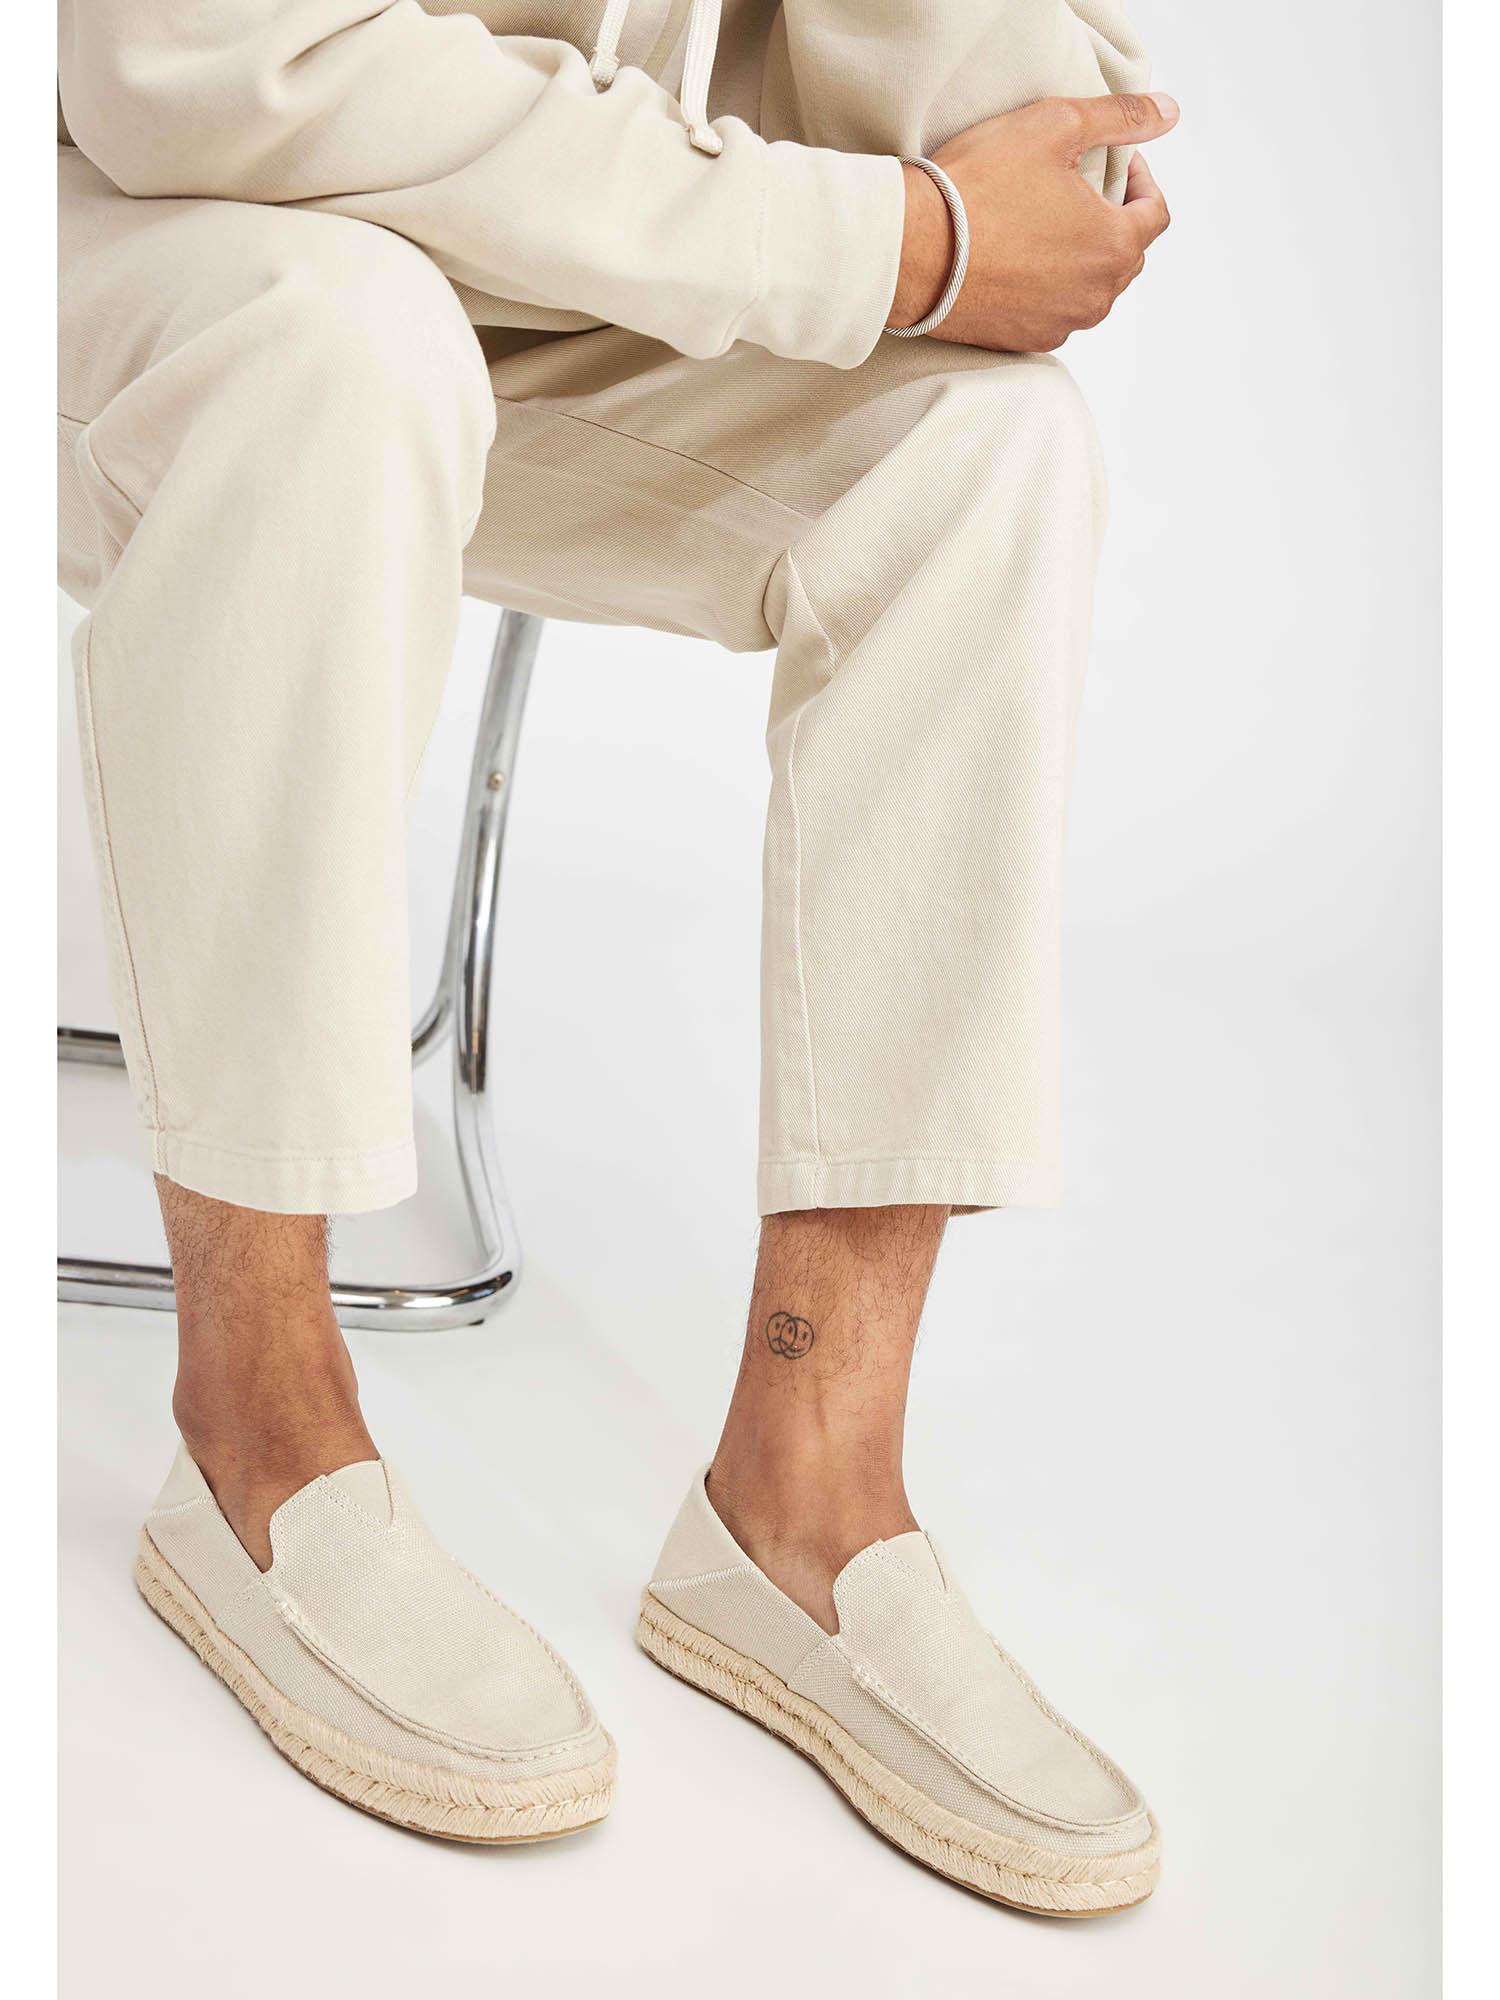 alonso-loafers-cream-suede-espadrilles